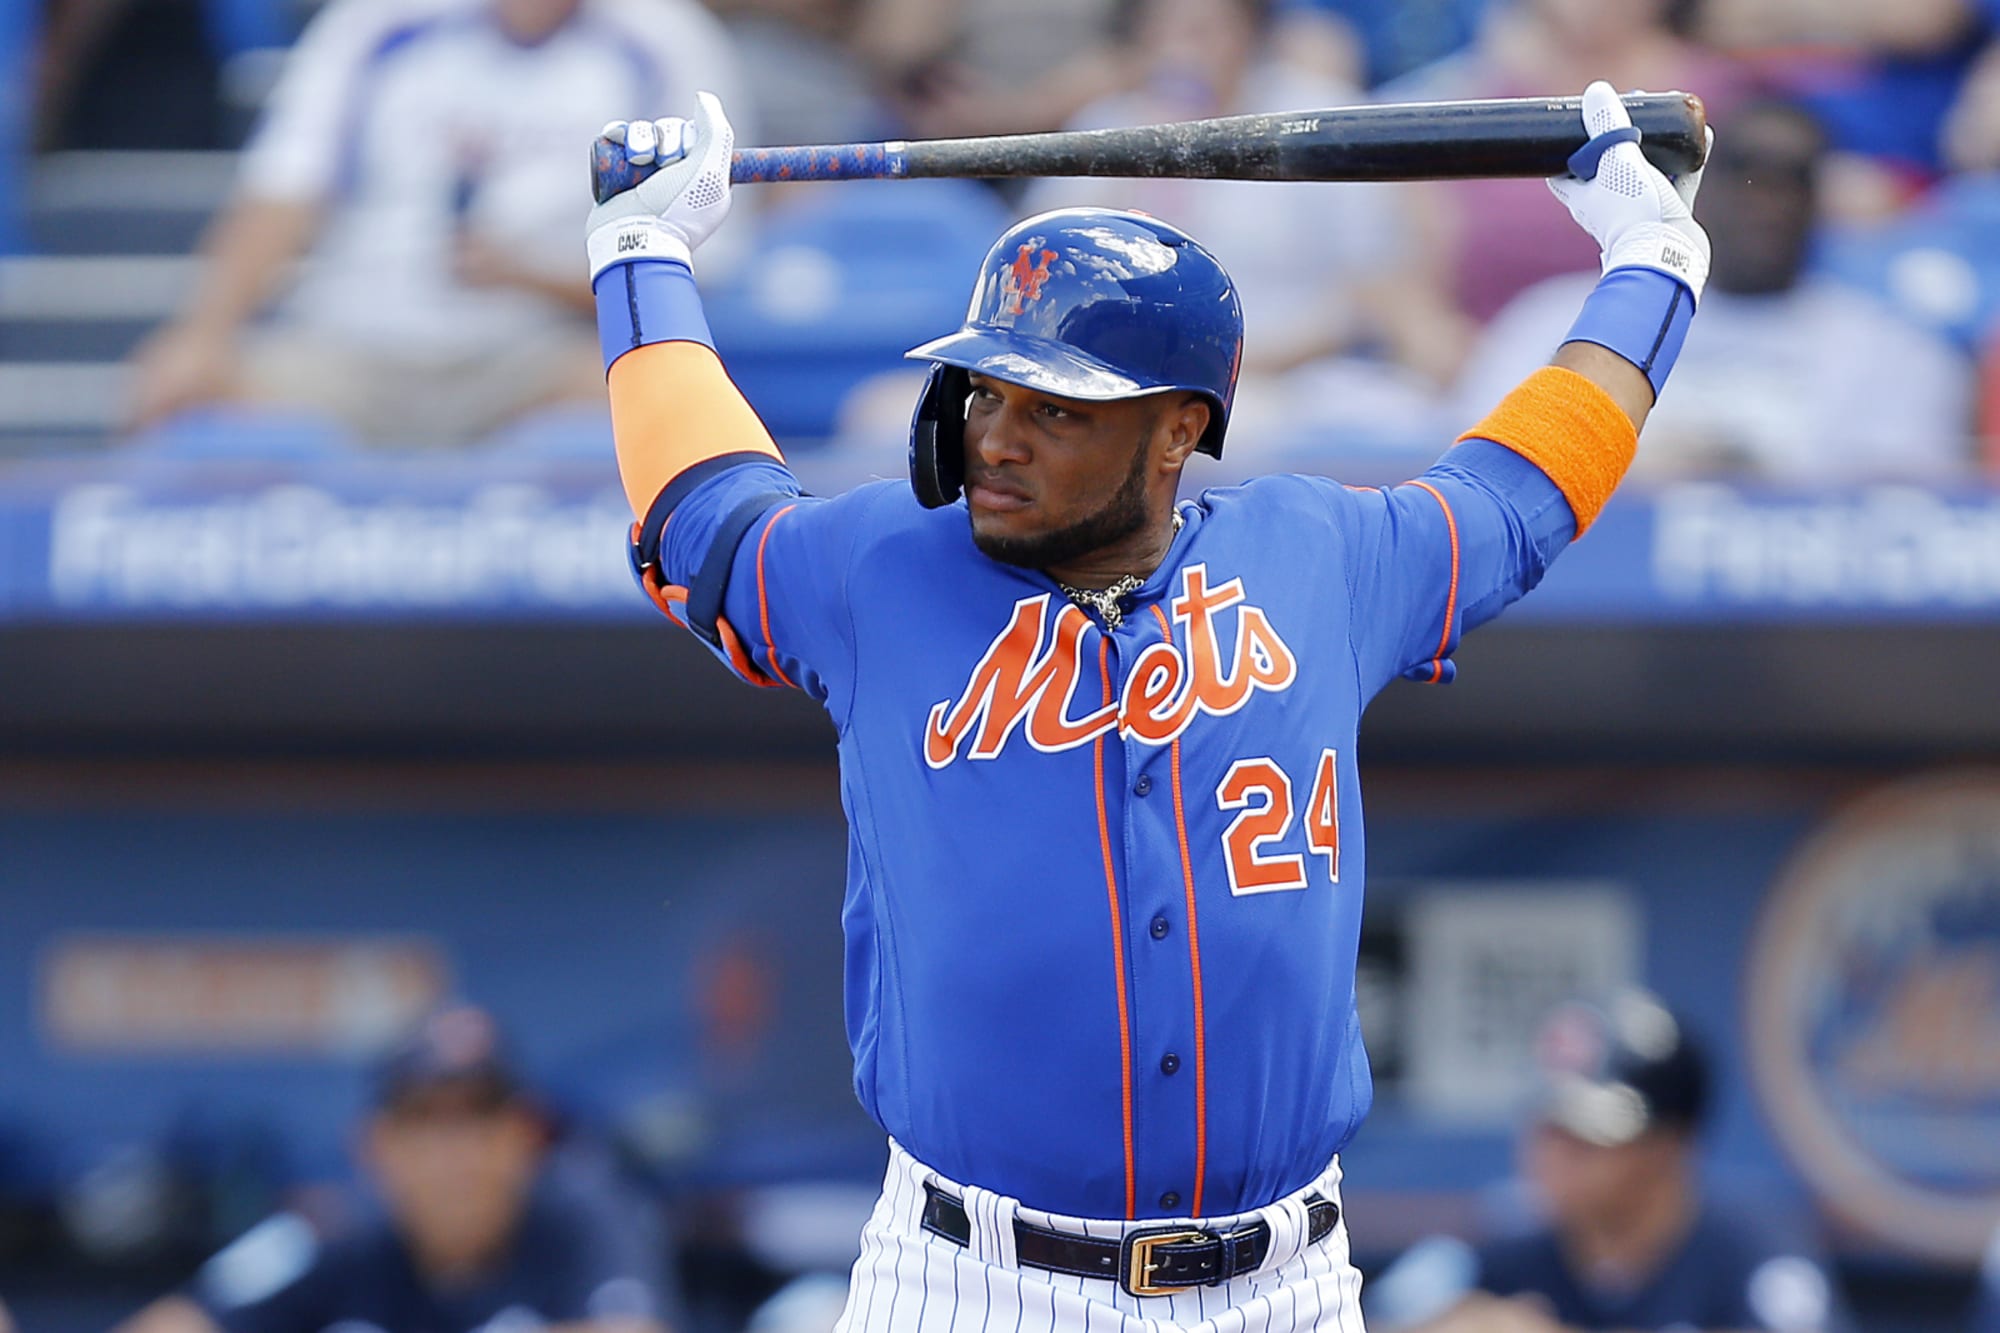 Mets: Robinson Cano breaks five-year drought on Opening Day